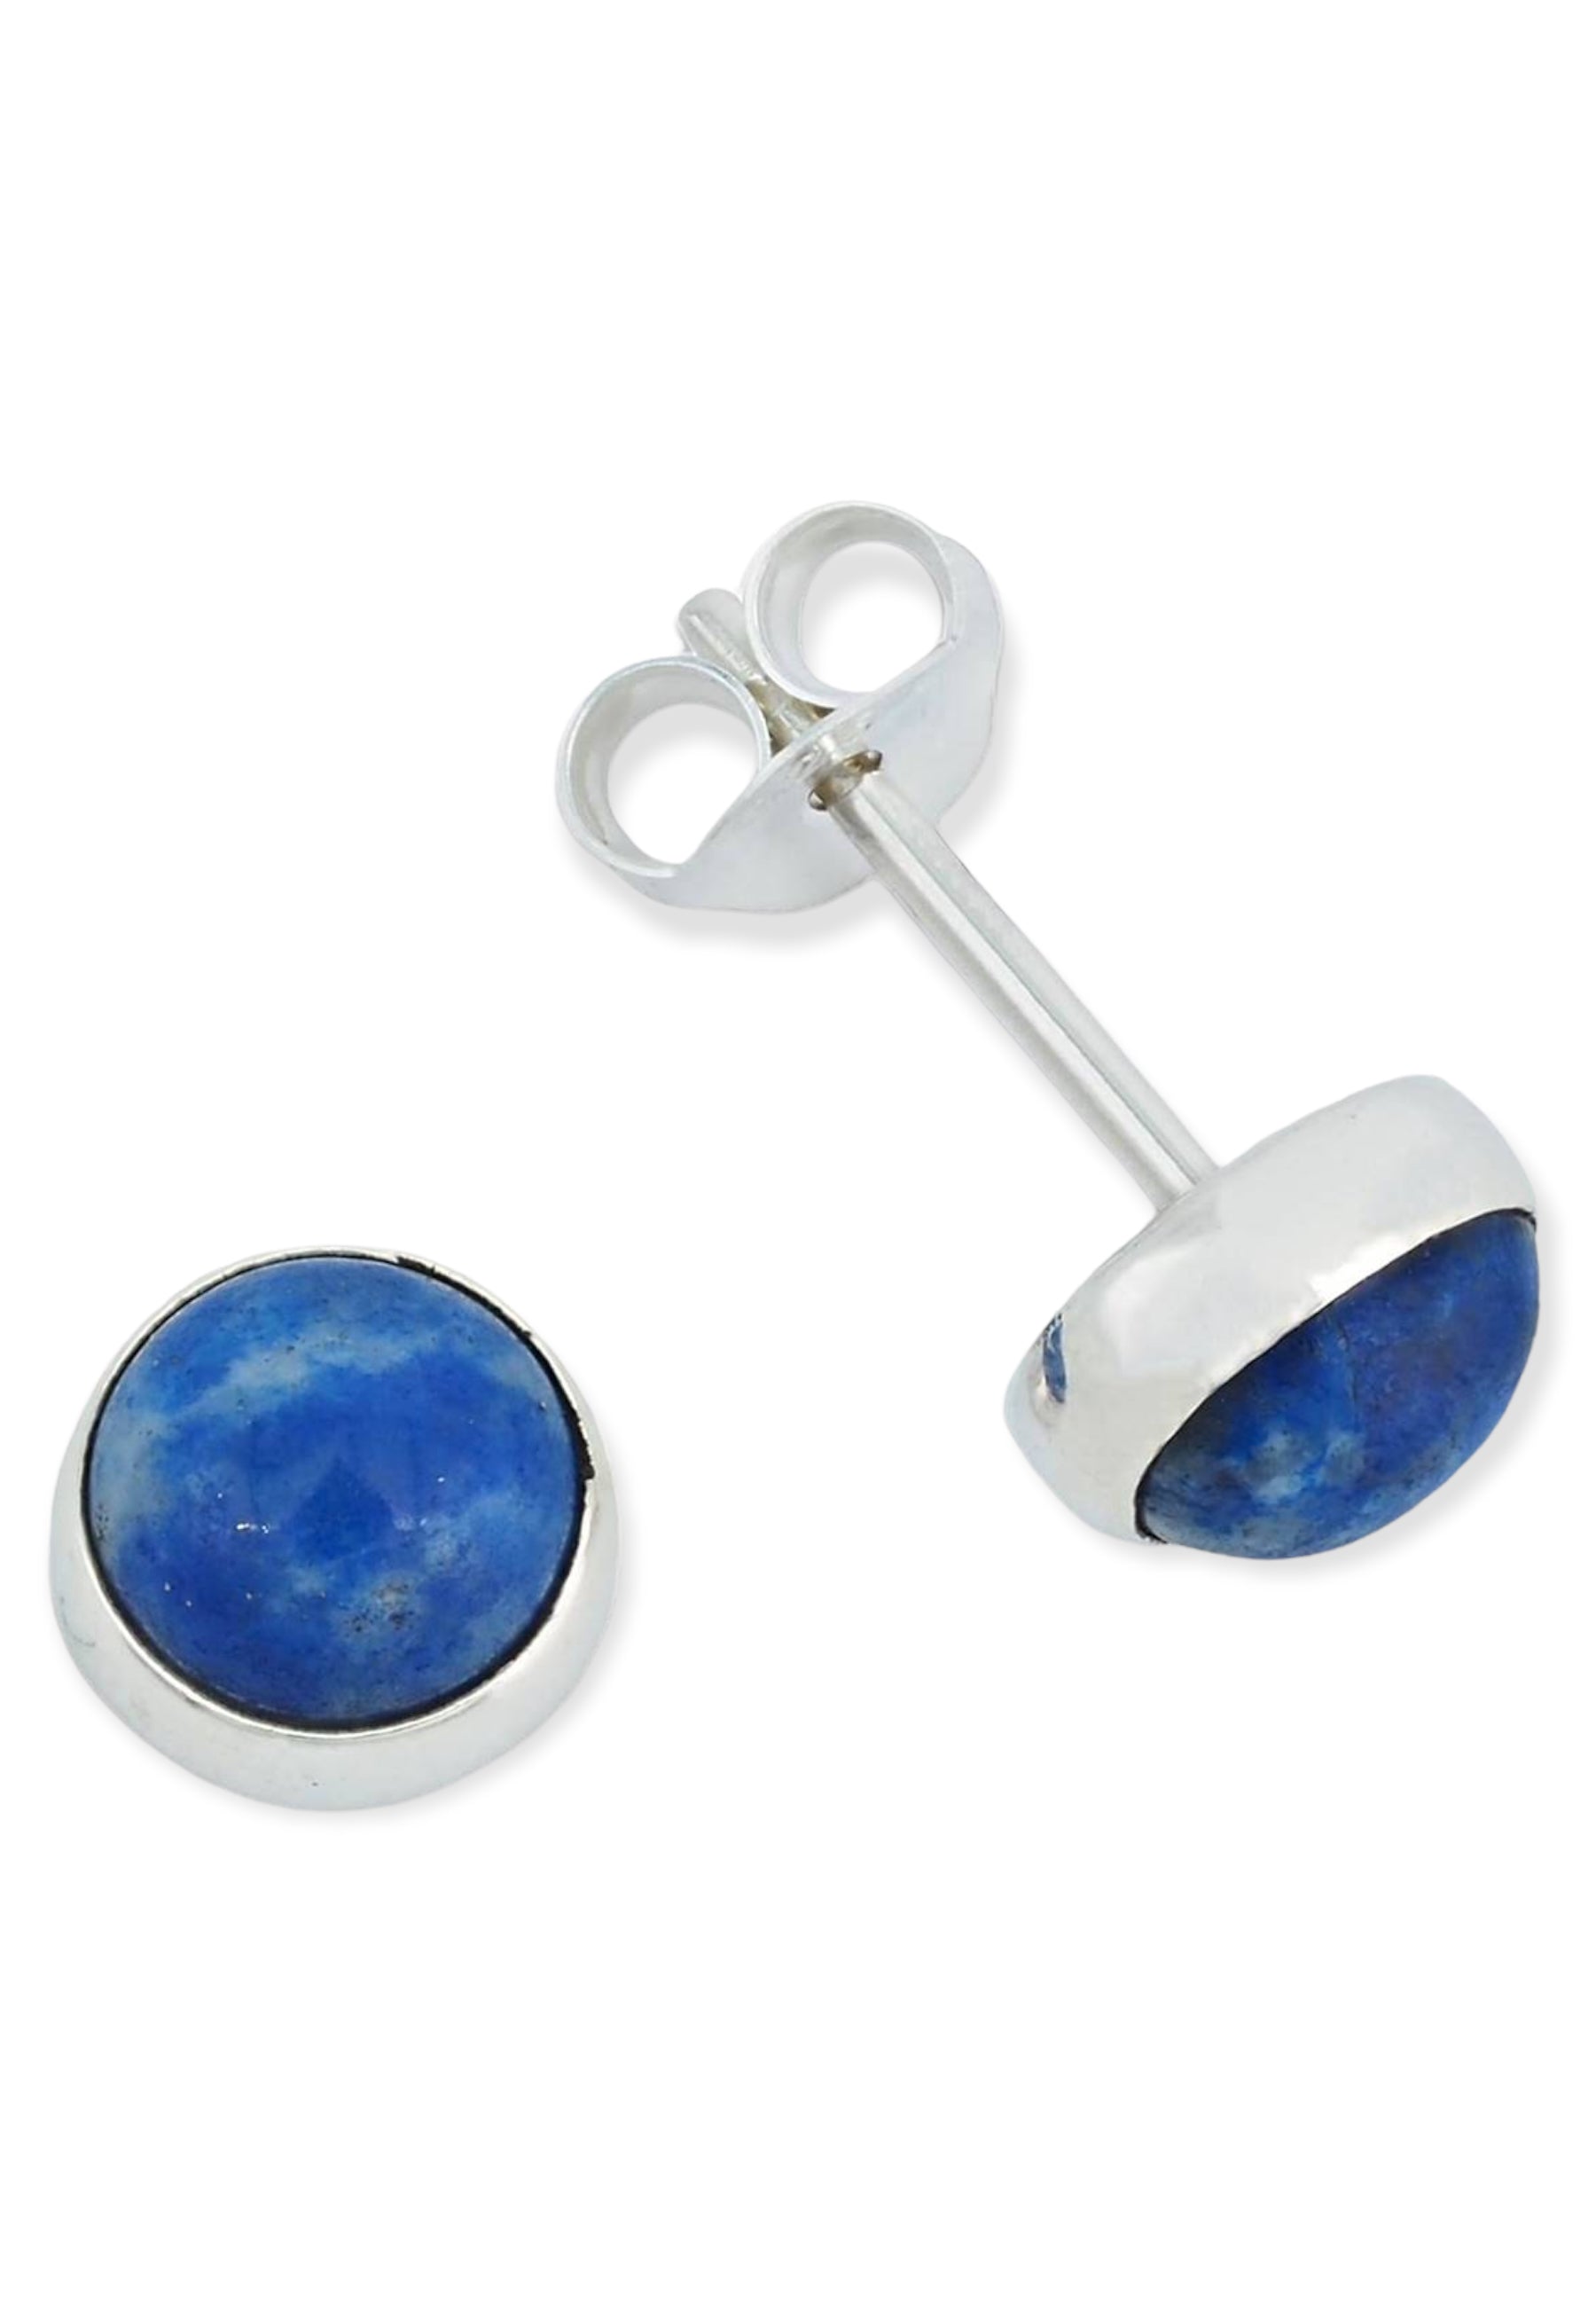 Ear studs SAMA, round, small, made of 925 sterling silver